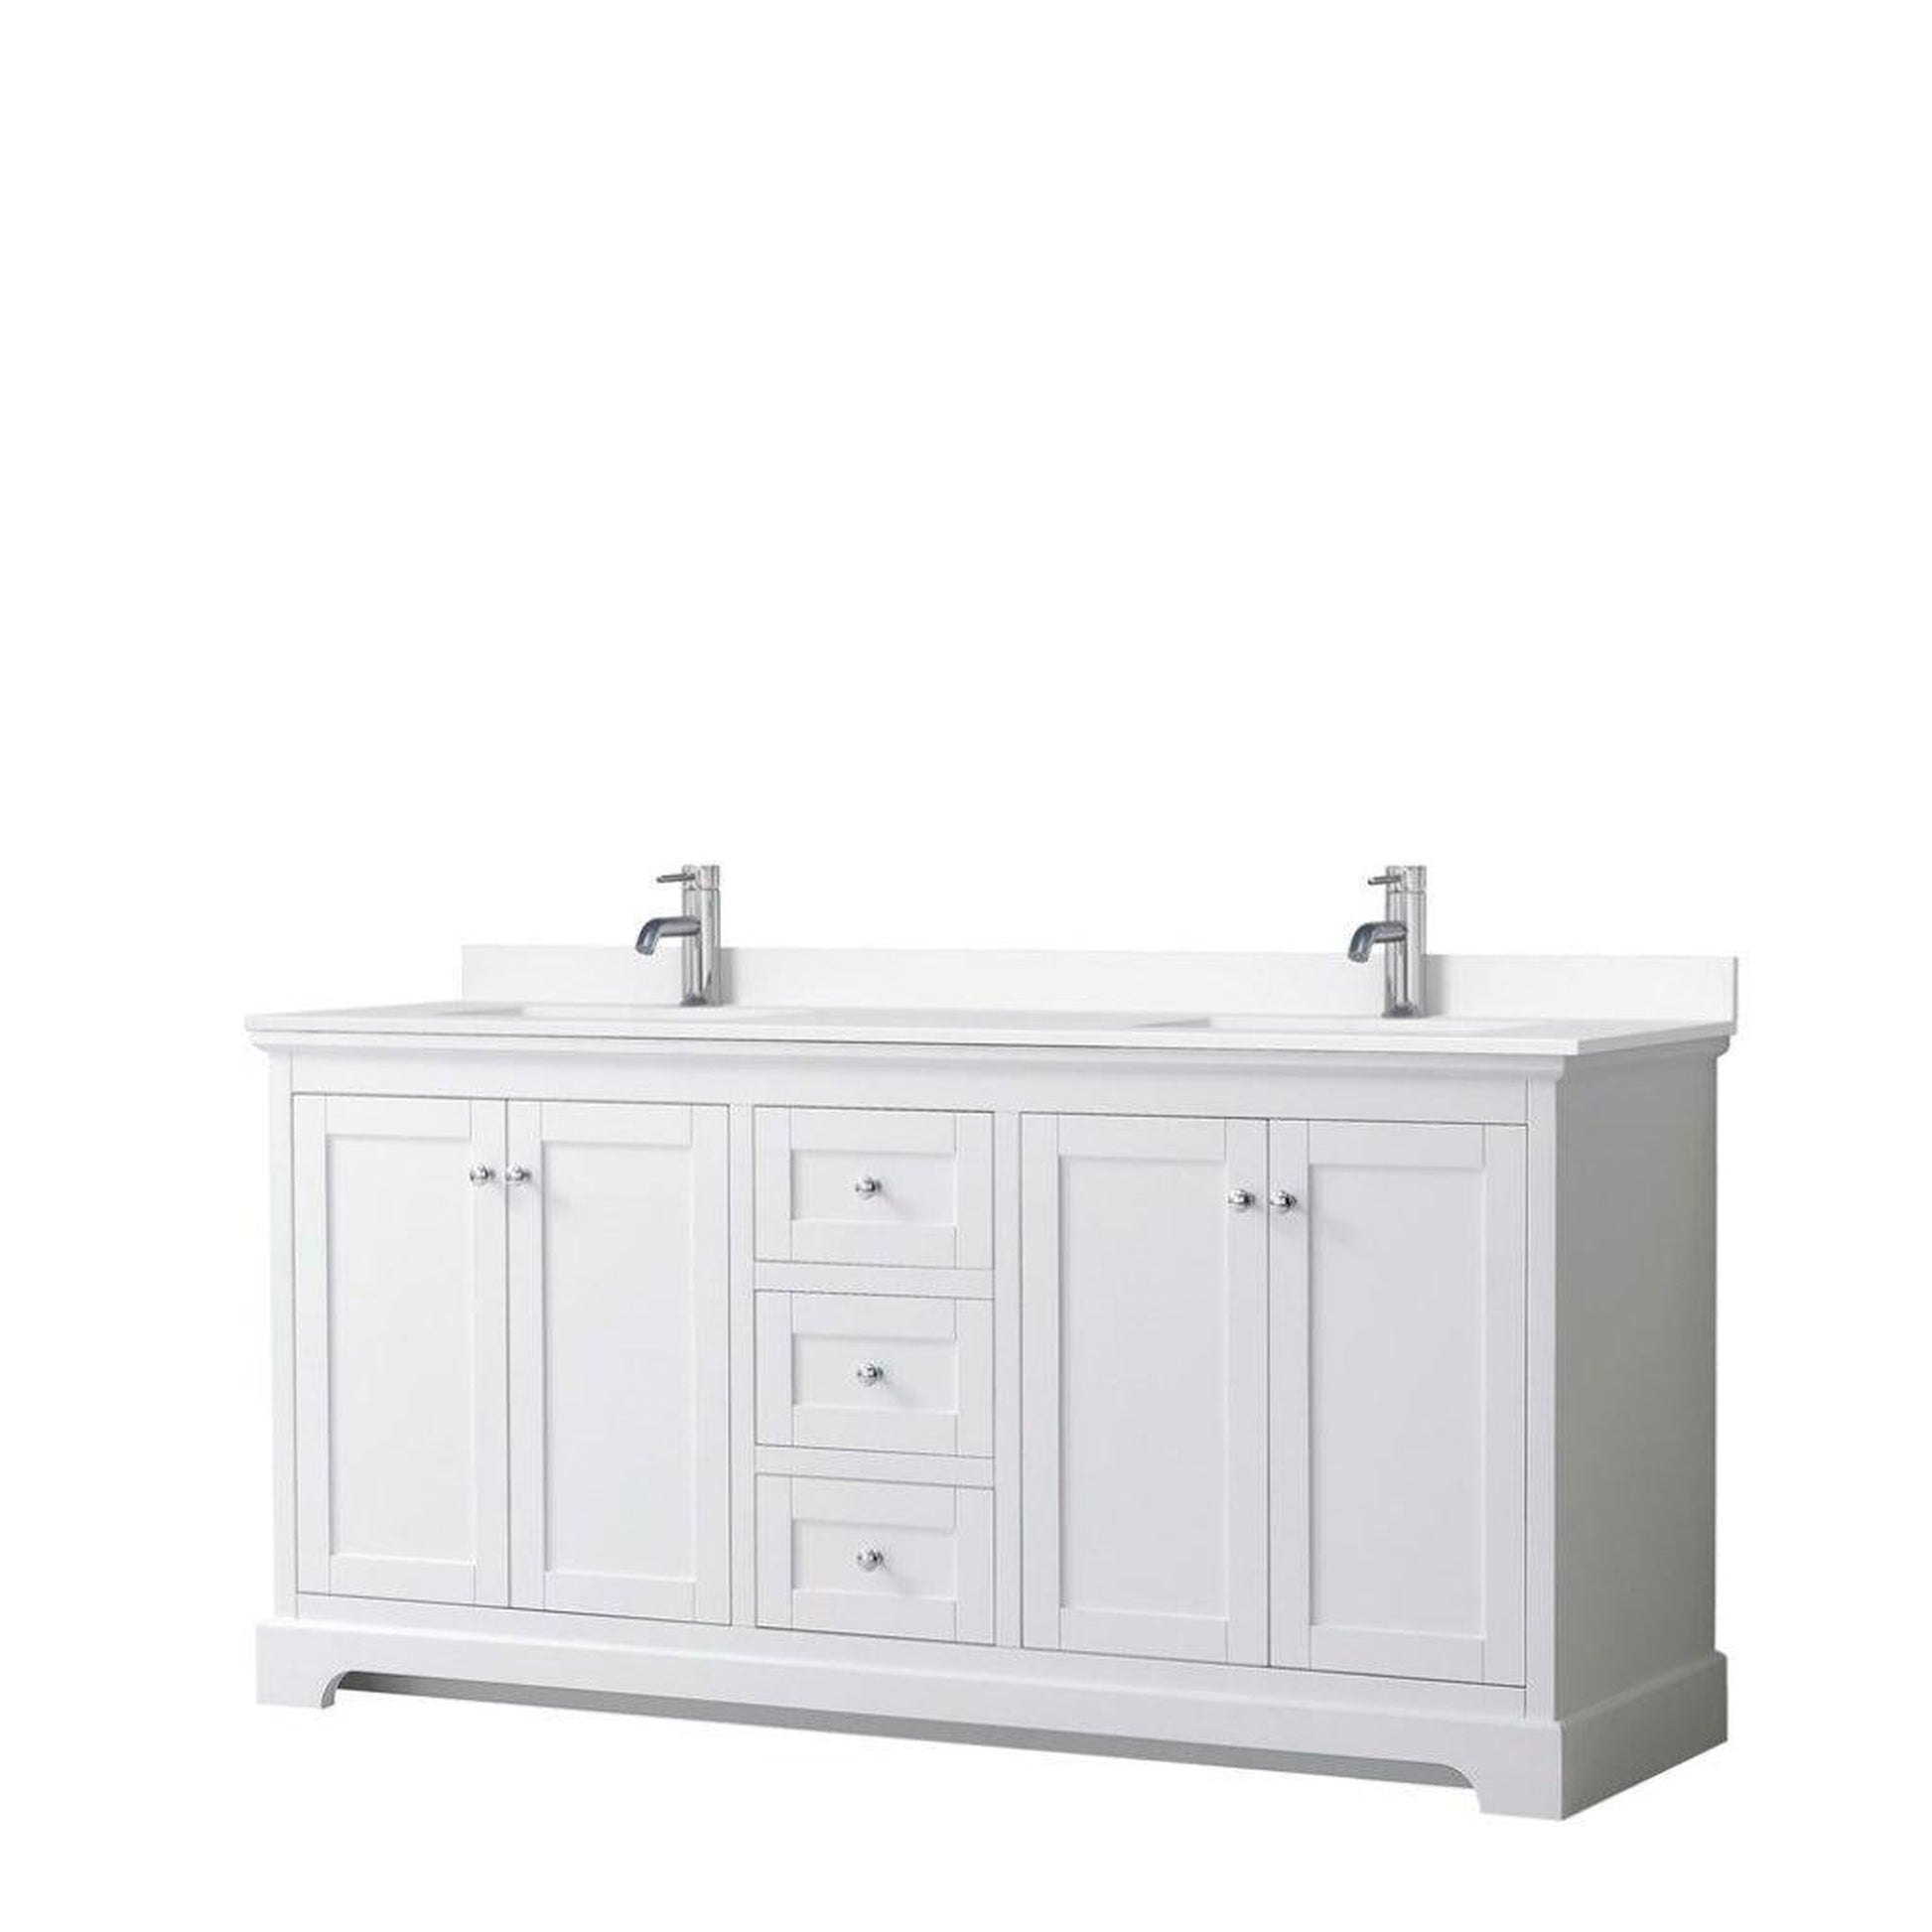 Wyndham Collection Avery 72" White Double Bathroom Vanity, White Cultured Marble Countertop With 1-Hole Faucet, Square Sink, Polished Chrome Trims